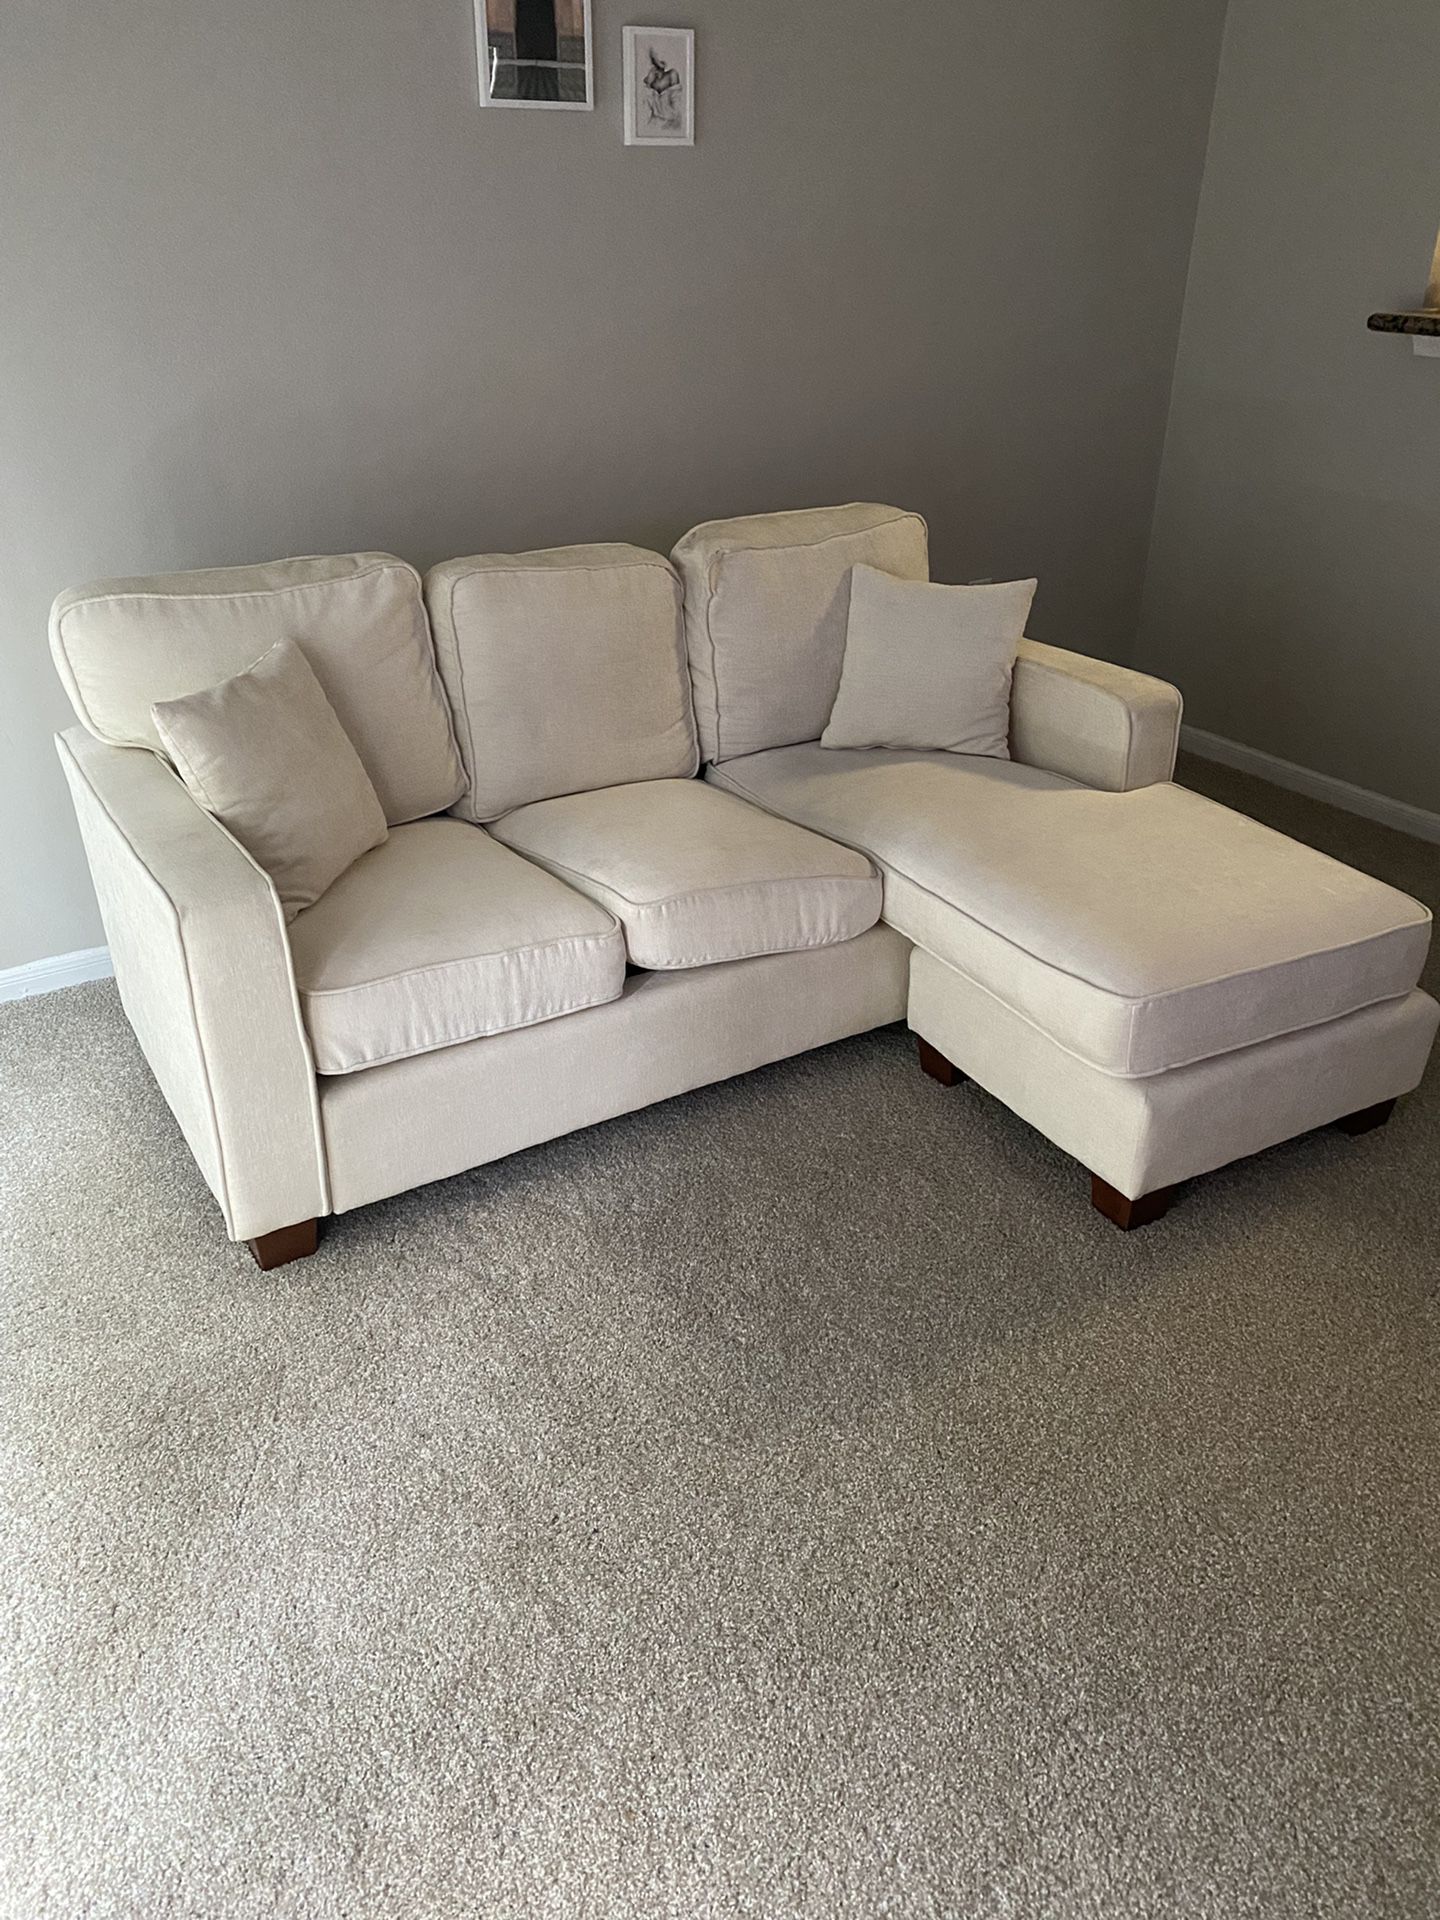 Beige Setional Couch